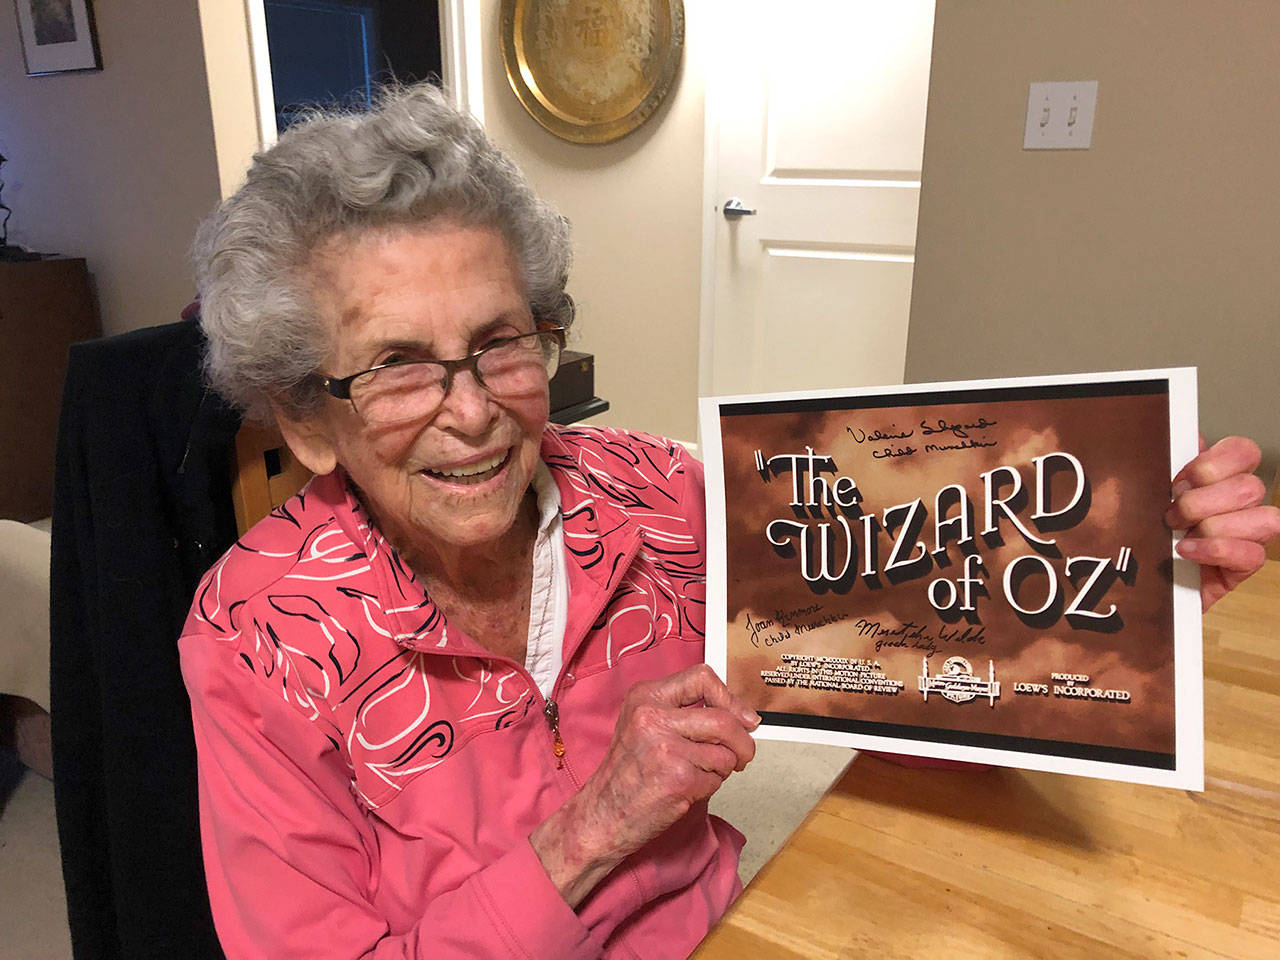 Mercer Island resident Meredythe Glass poses with memorabilia from “The Wizard of Oz.” Glass was an extra in the film, and will be the guest of honor at a party at her retirement community celebrating Hollywood on Feb. 22. Photo courtesy of Greg Asimakoupoulos